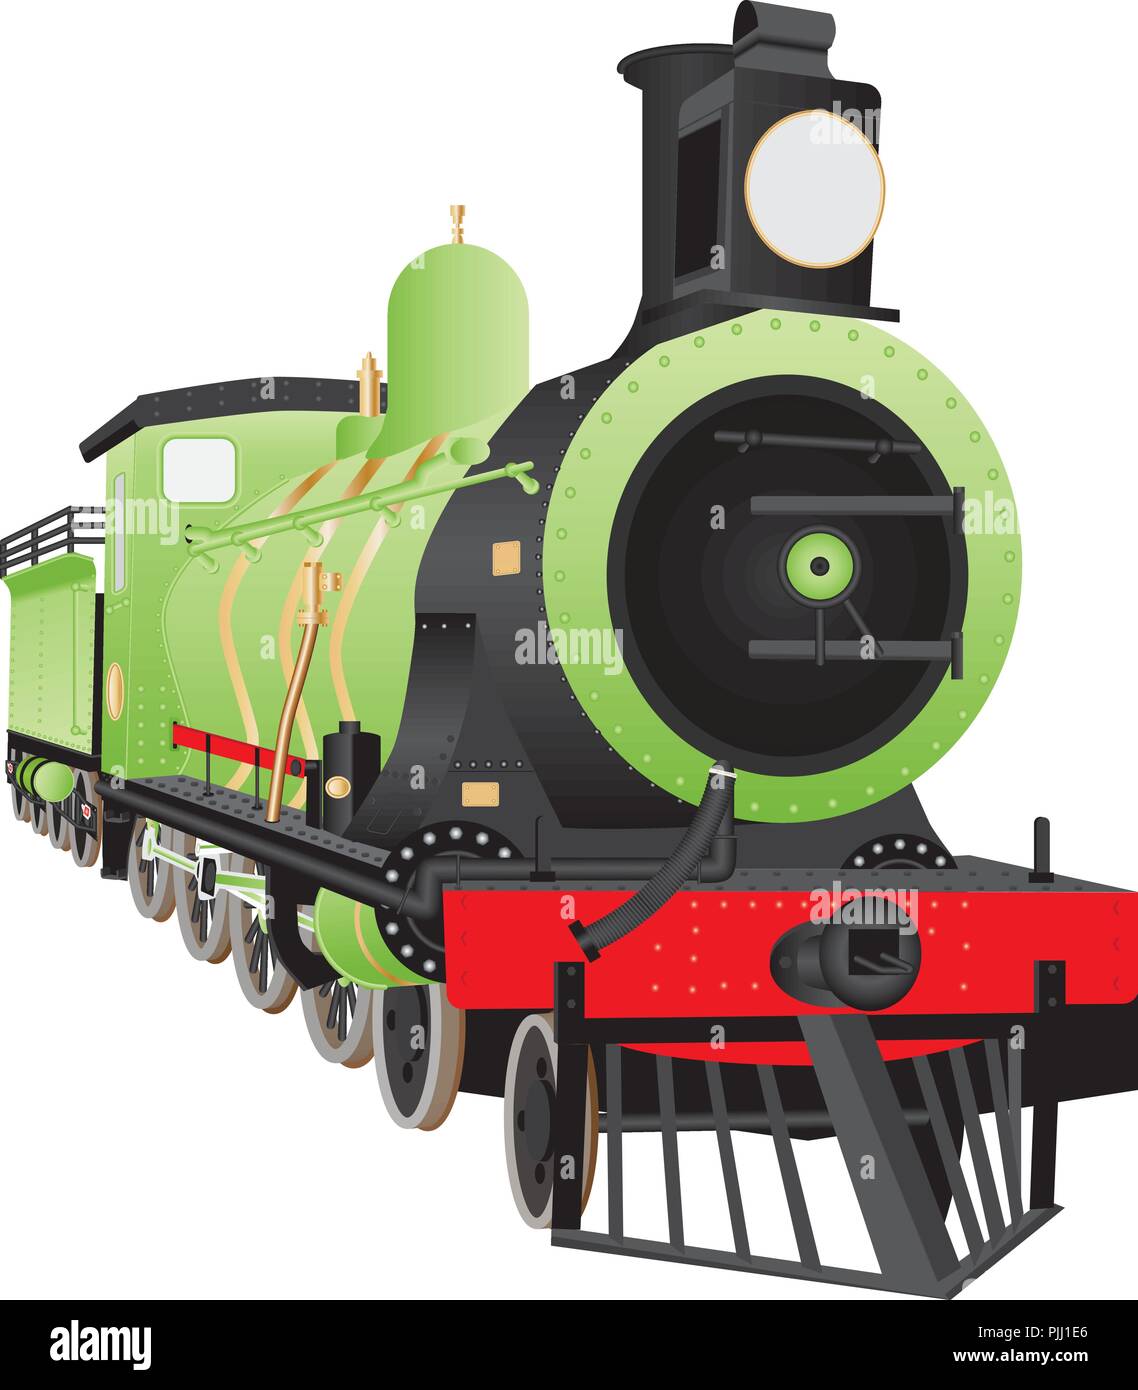 An Old Twelve Wheel or 480 Steam Railway Tender Locomotive with a cowcatcher, headlight and brass fittings painted in a green,red and black livery iso Stock Vector